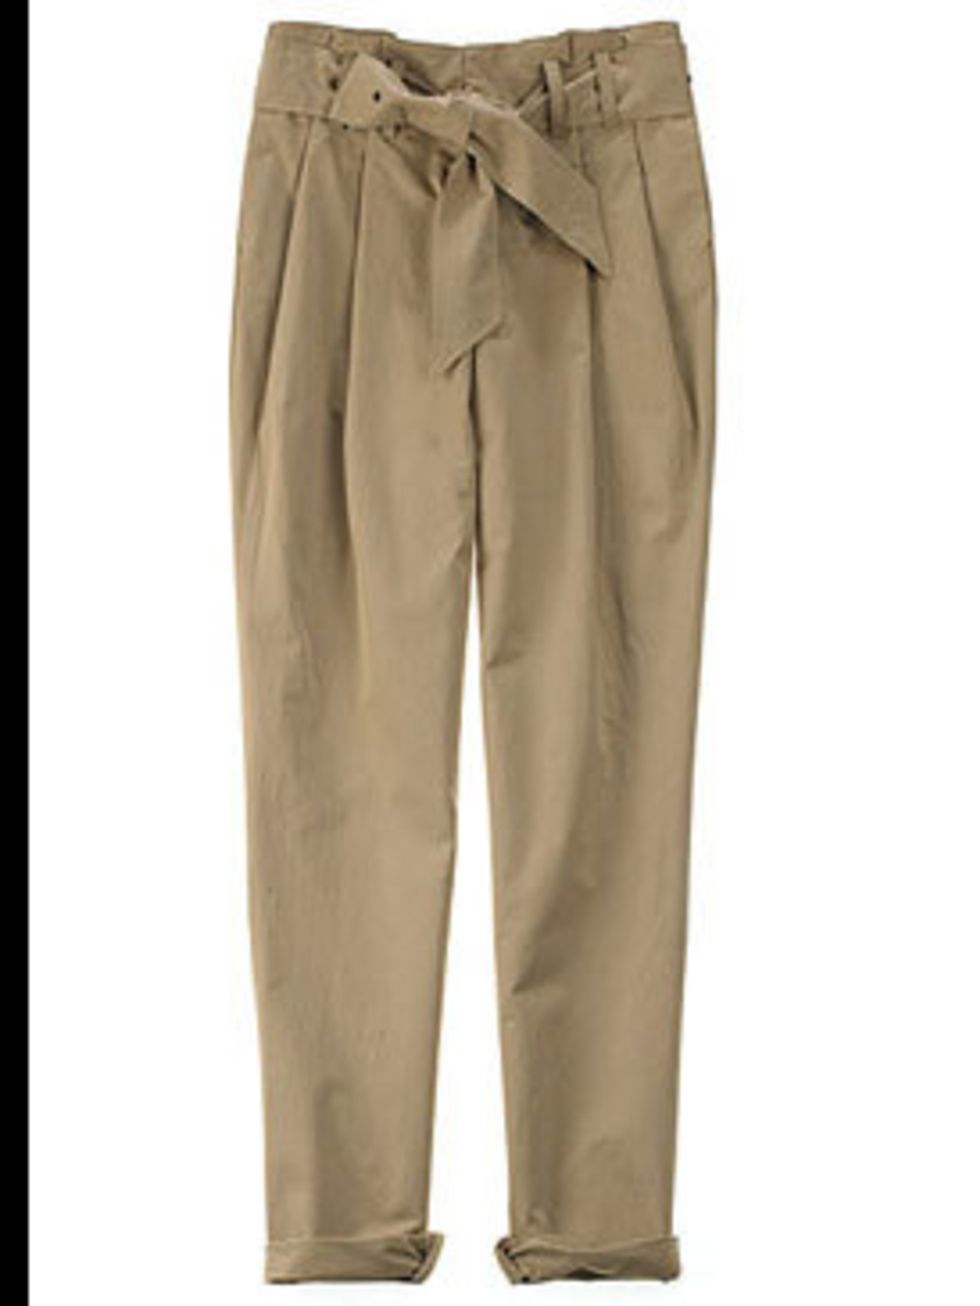 <p>Pleated chinos, £262.90, by Boy by Band of Outsiders at <a href="http://www.lagarconne.com/store/item.htm?itemid=4337&amp;sid=564&amp;pid=561">La Garconne</a>.</p>